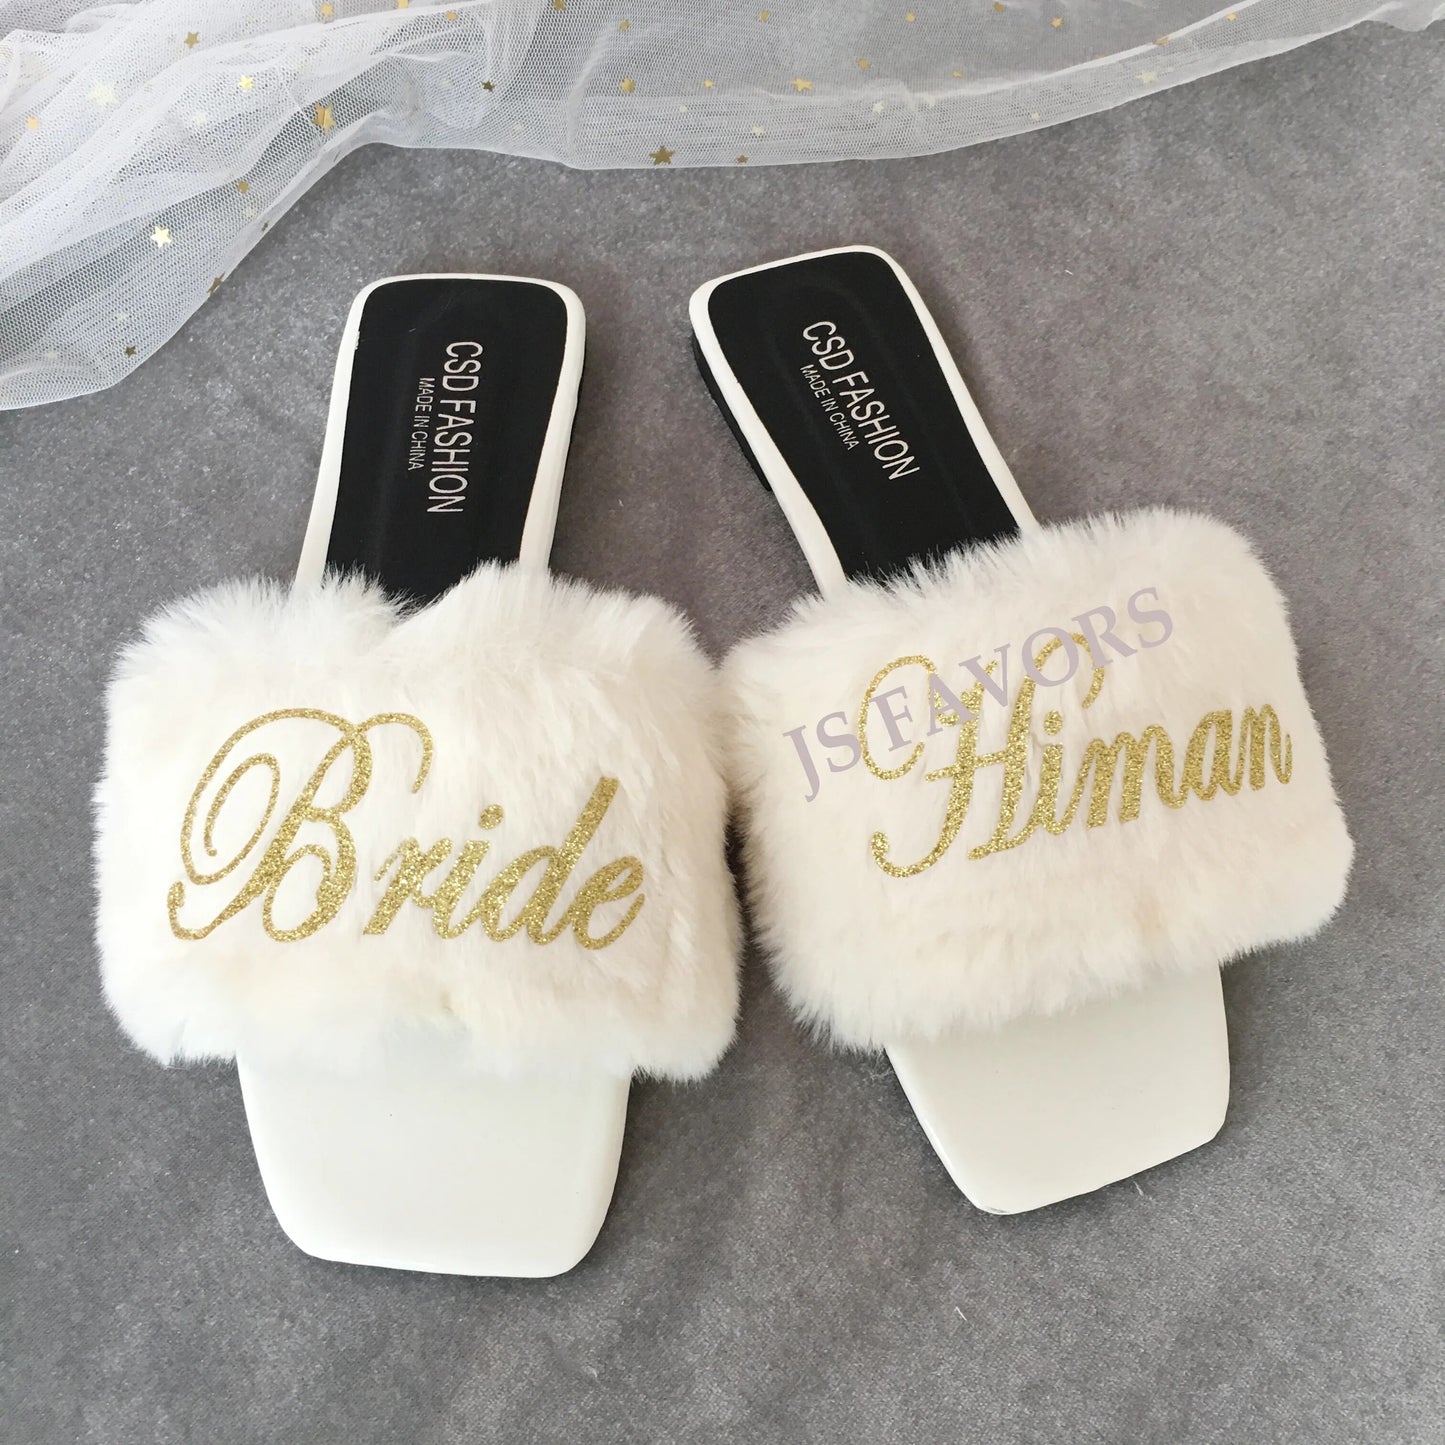 Custom Flur Sandal: Mother, Sister, Bride & Bridesmaid Indoor/Outdoor Slippers Personalized Gifts.